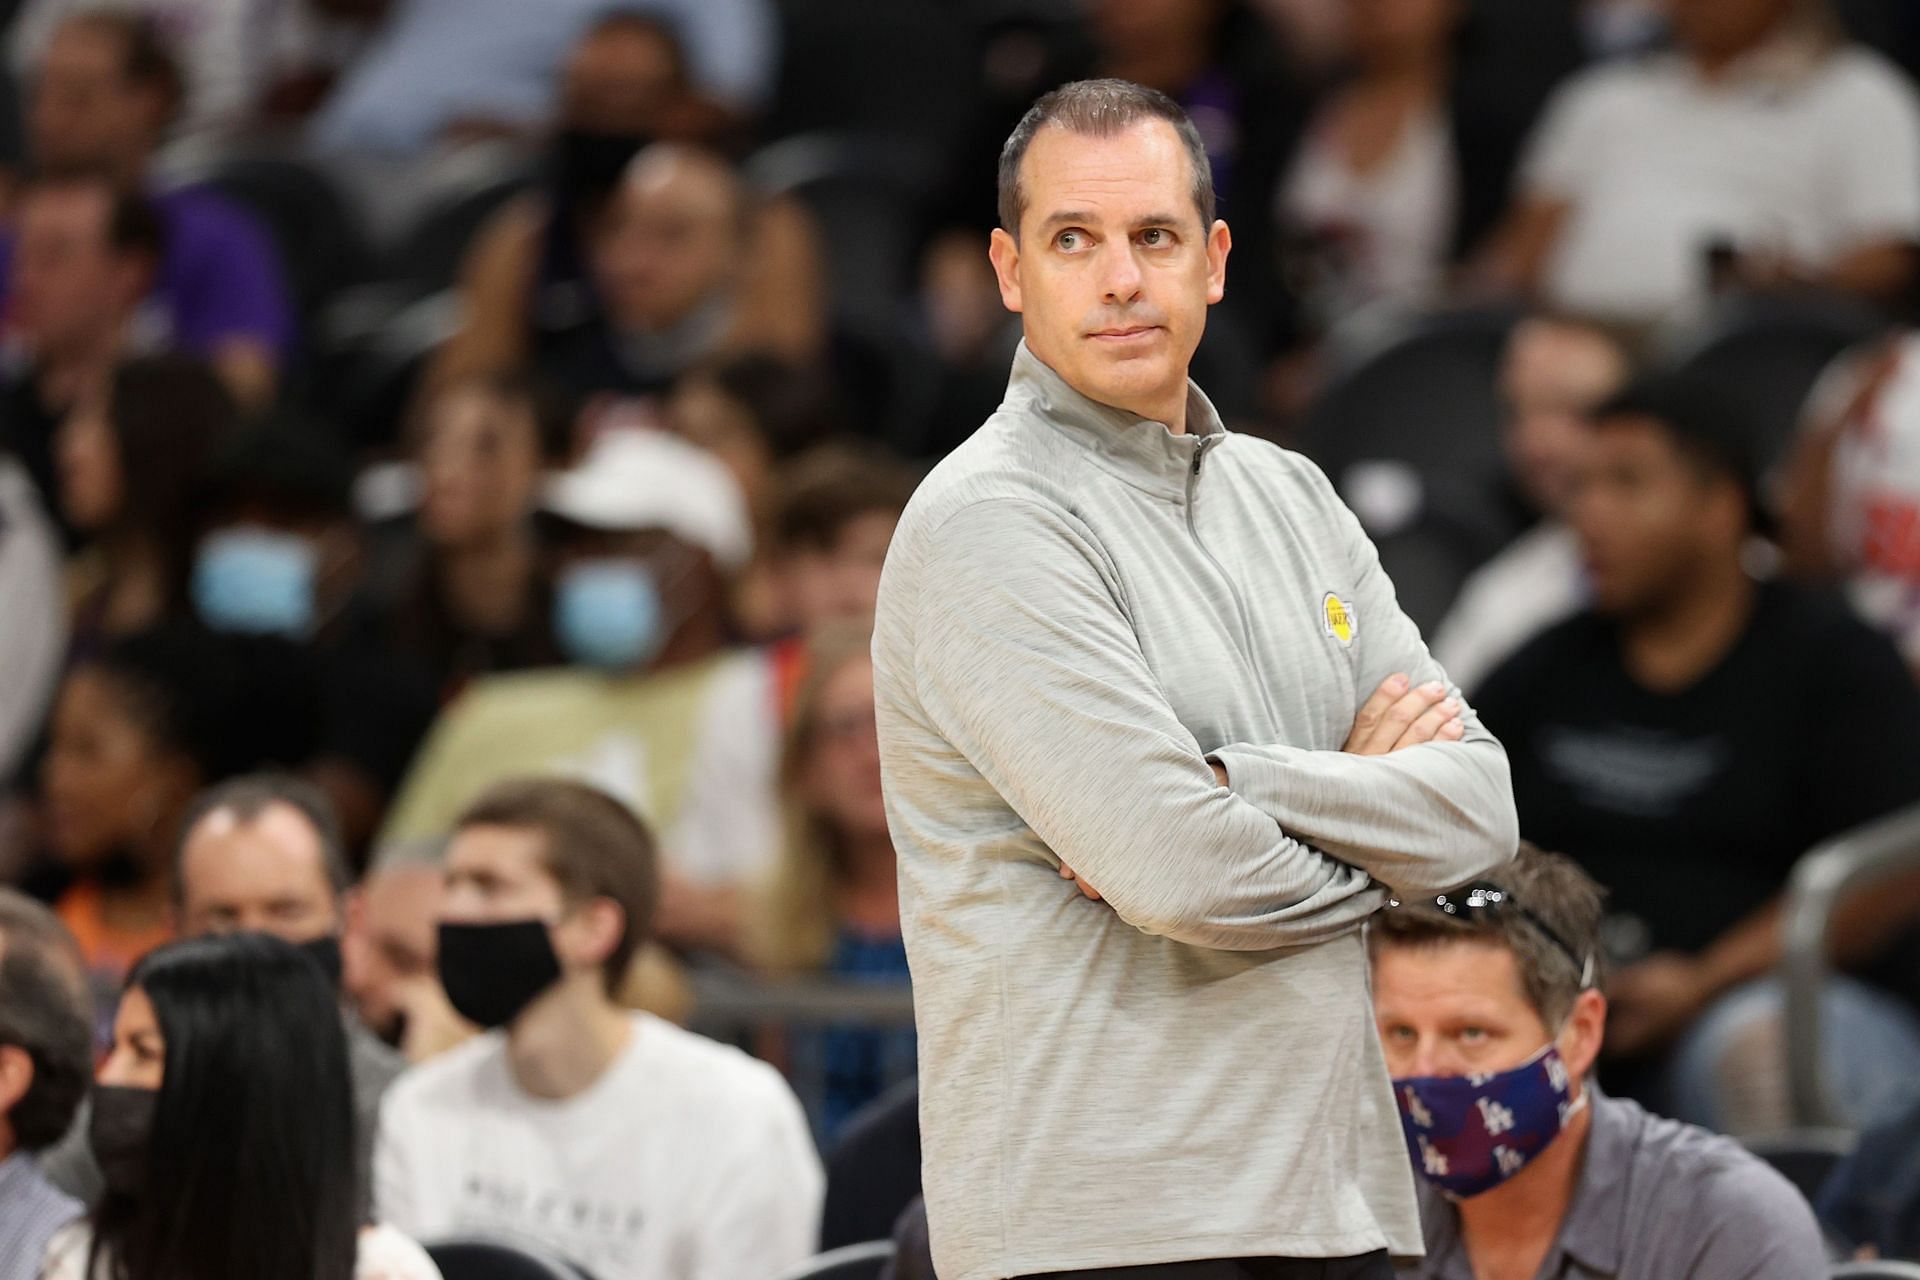 LA Lakers head coach Frank Vogel was a disappointed man after his side lost to the Oklahoma City Thunder on Wednesday